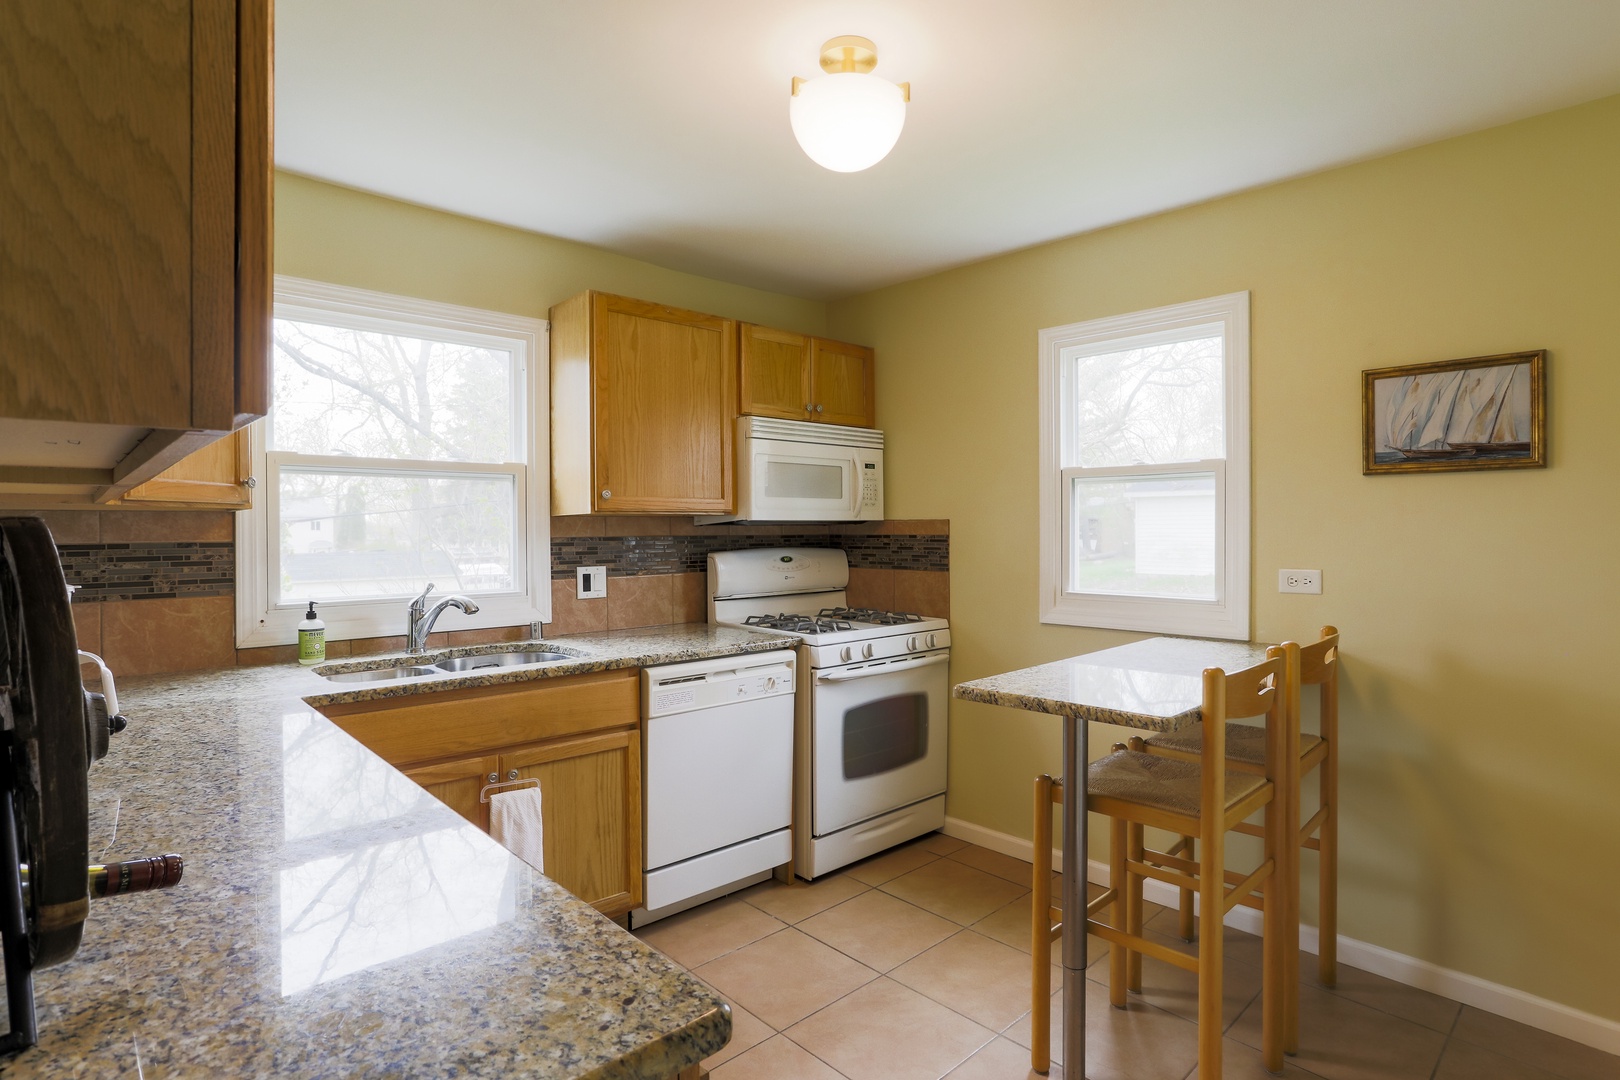 Enjoy morning coffee and meals in the kitchen, offering table seating for 2